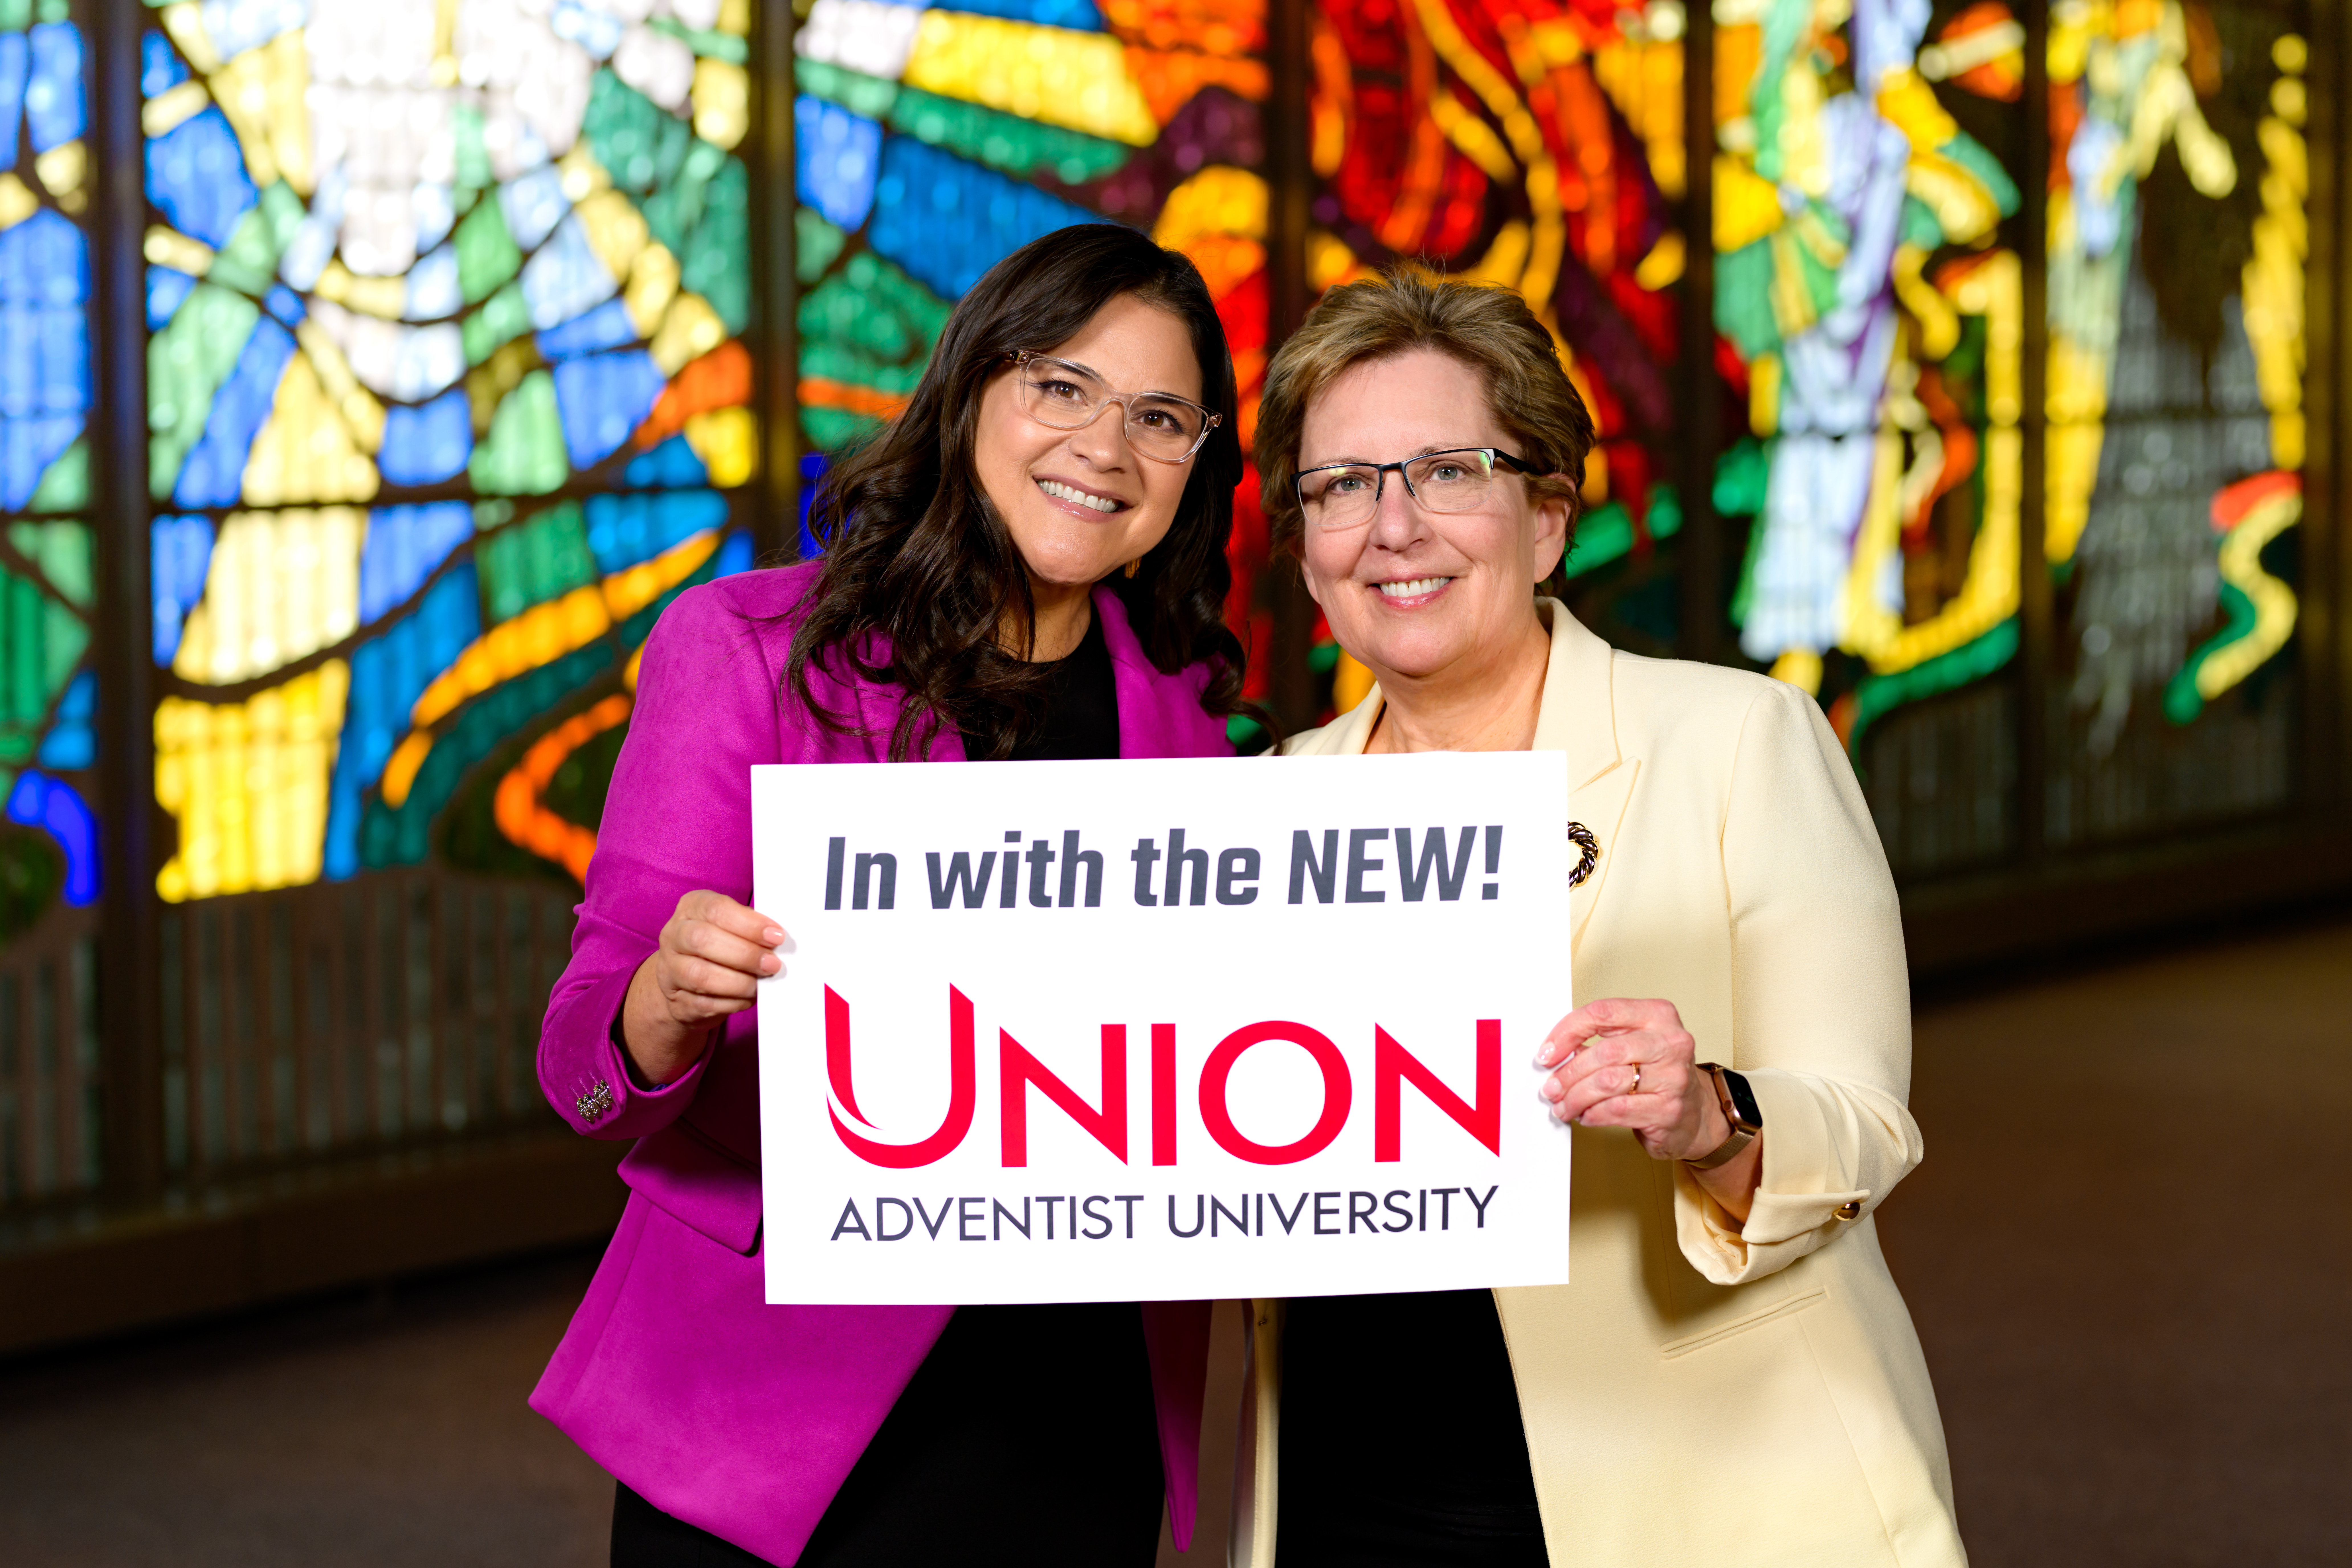 Photo of Dr. Bazan with Dr. Sauder holding a sign saying "In with the new! Union Adventist University"